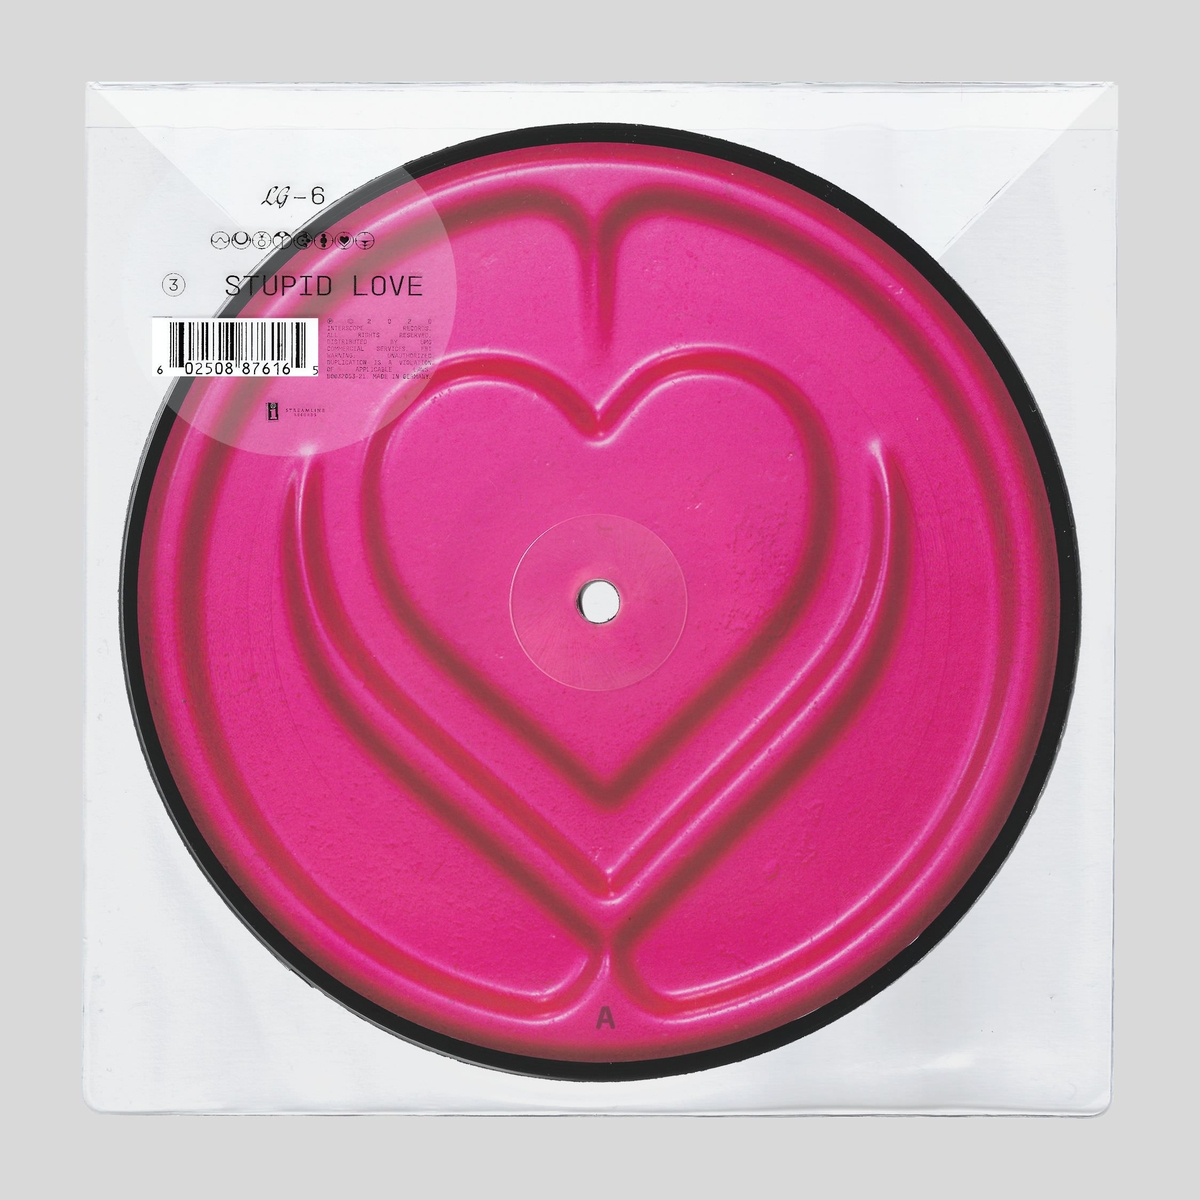 Stupid Love (7" Picture Disc)